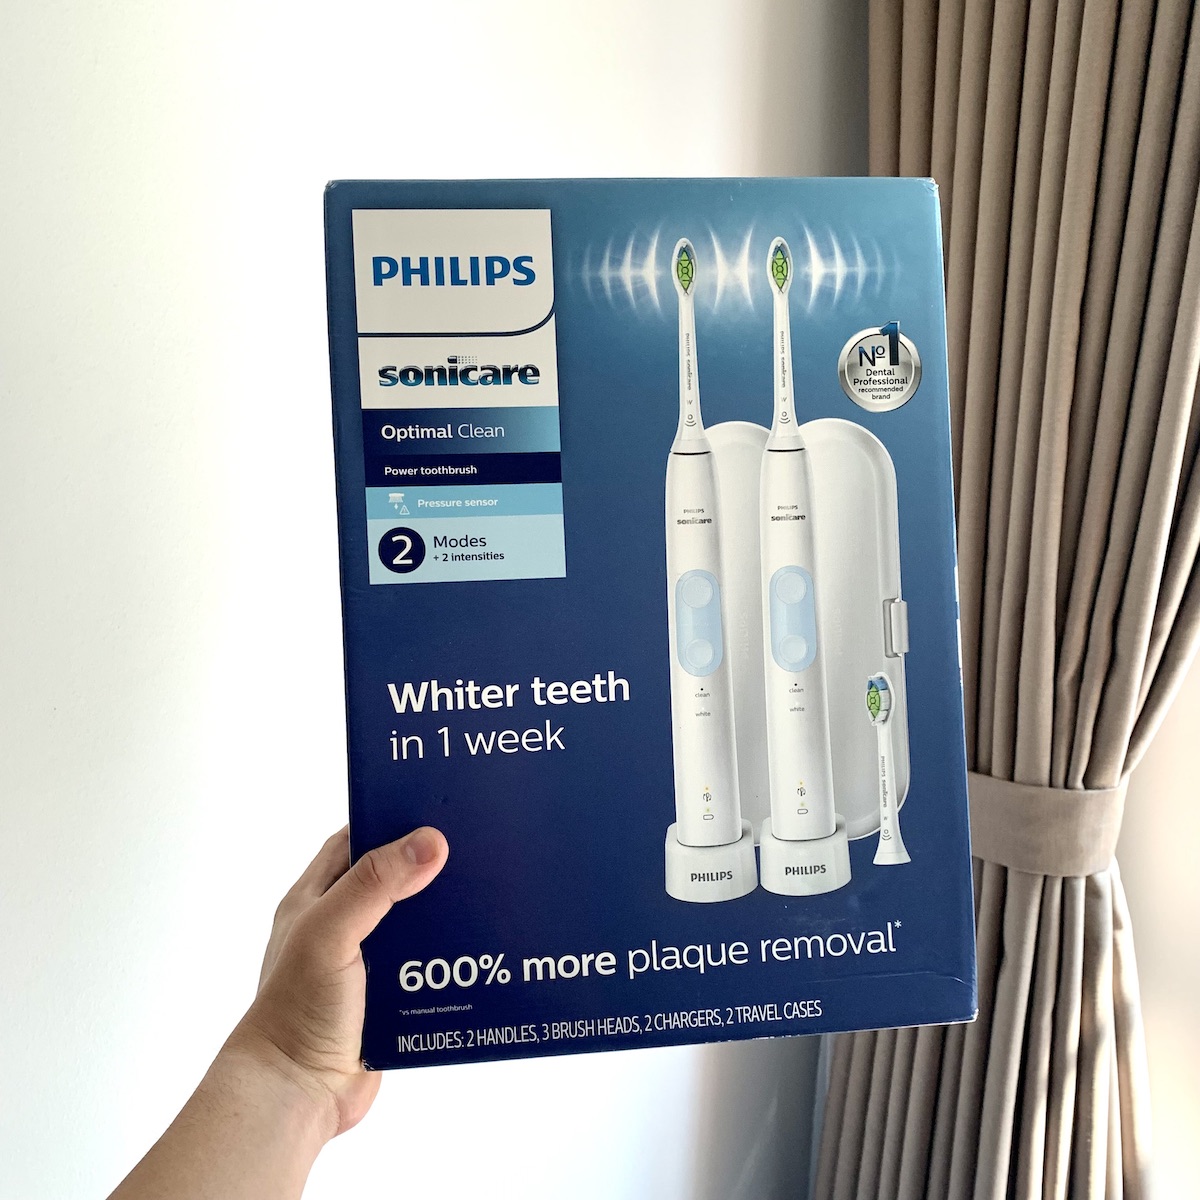 Ban chai dien Philips Sonicare Optimal Clean, philips sonicare 5000, protectiveclean